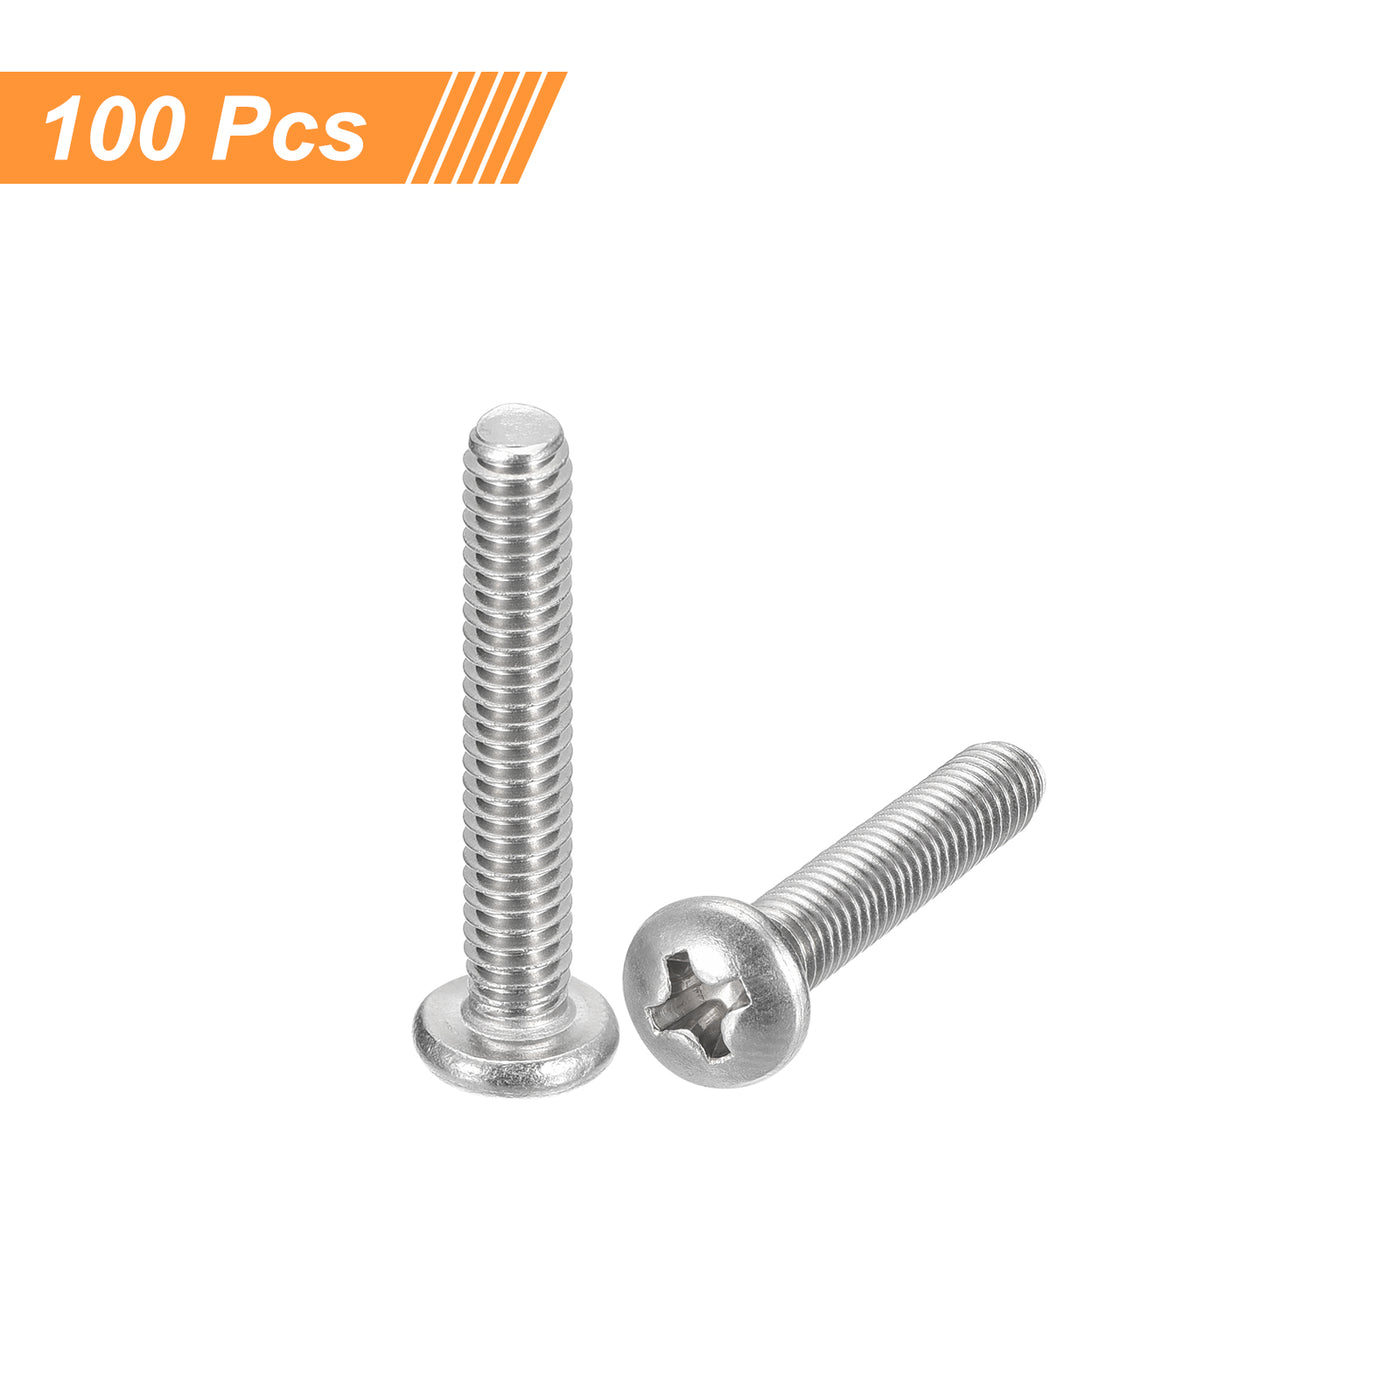 uxcell Uxcell #8-32x1" Pan Head Machine Screws, Stainless Steel 18-8 Screw, Pack of 100